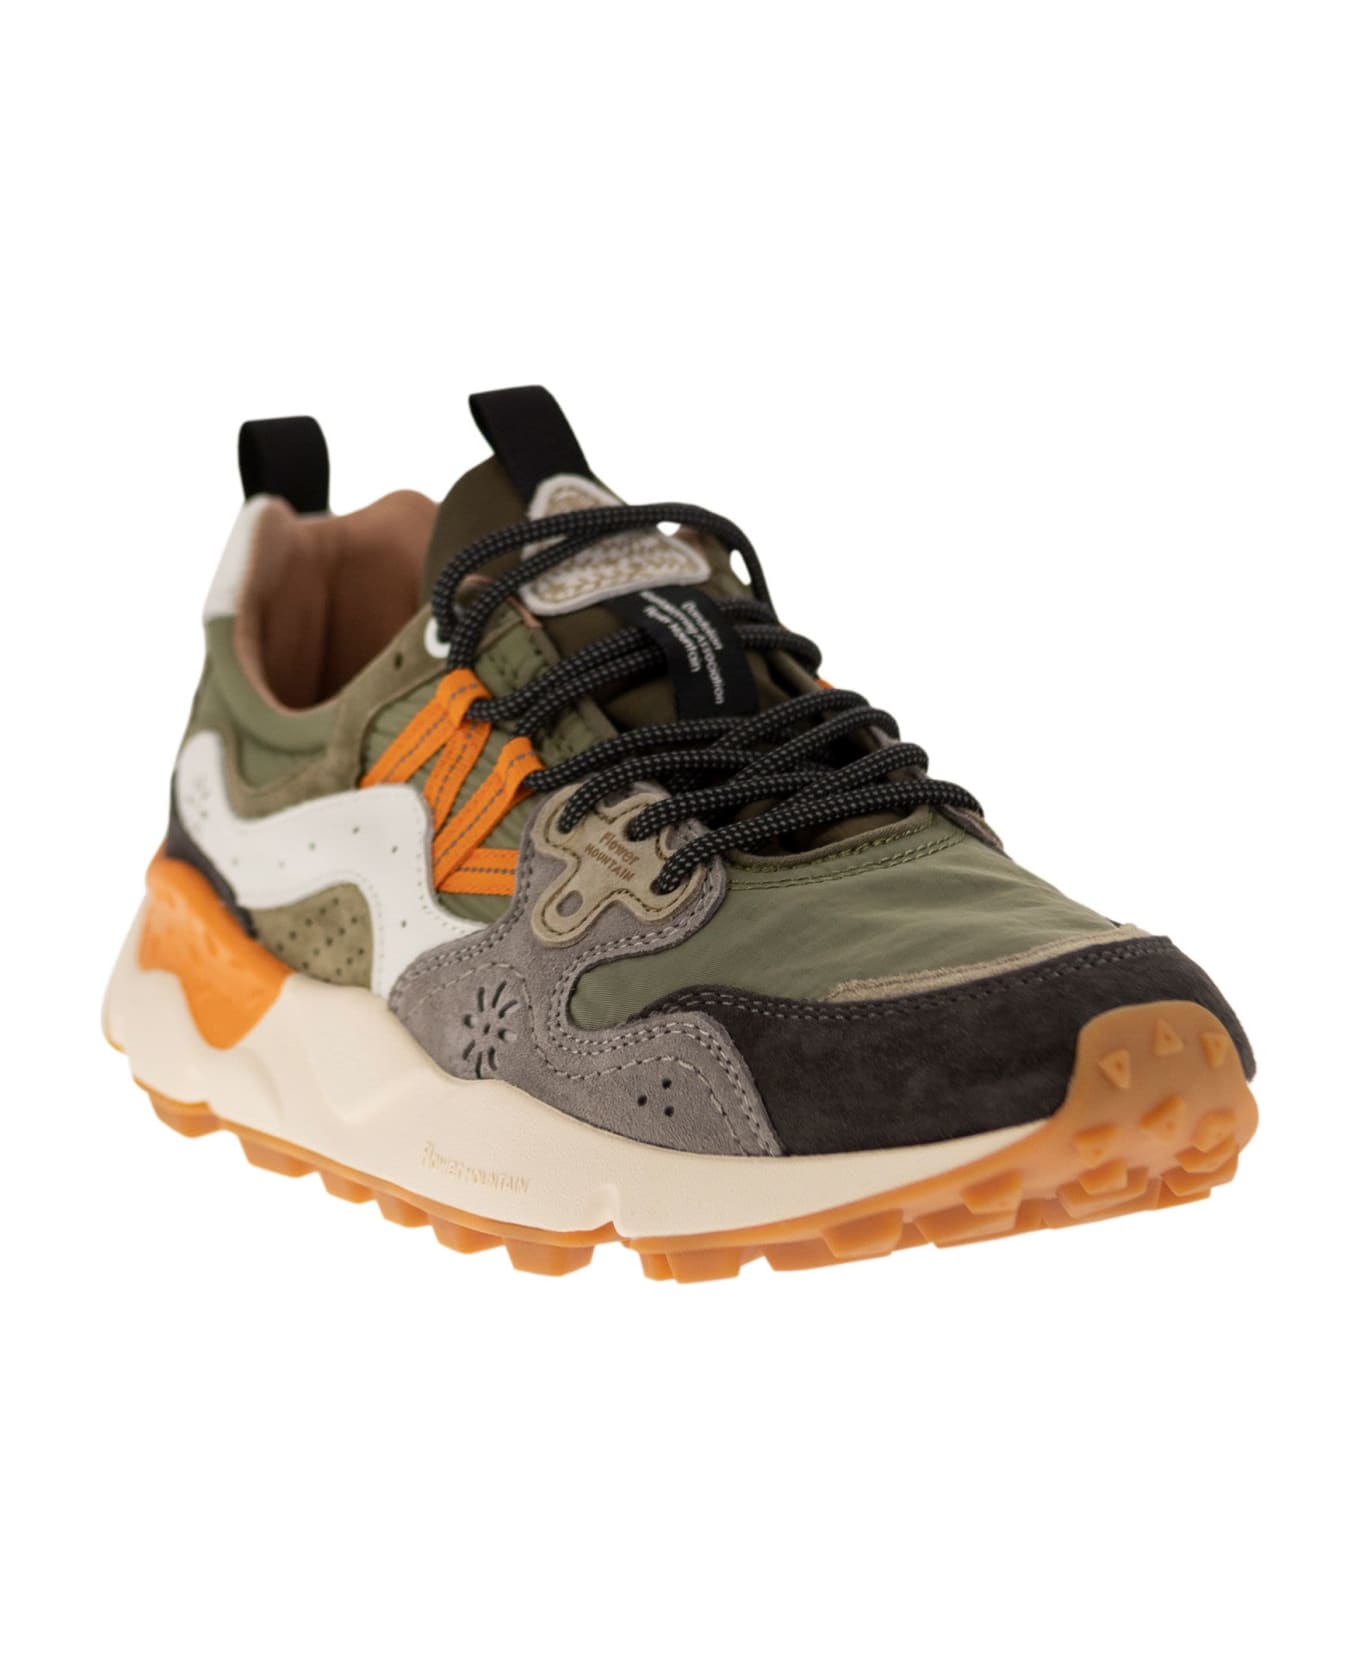 Flower Mountain Yamano 3 - Sneakers In Suede And Technical Fabric - Anthracite